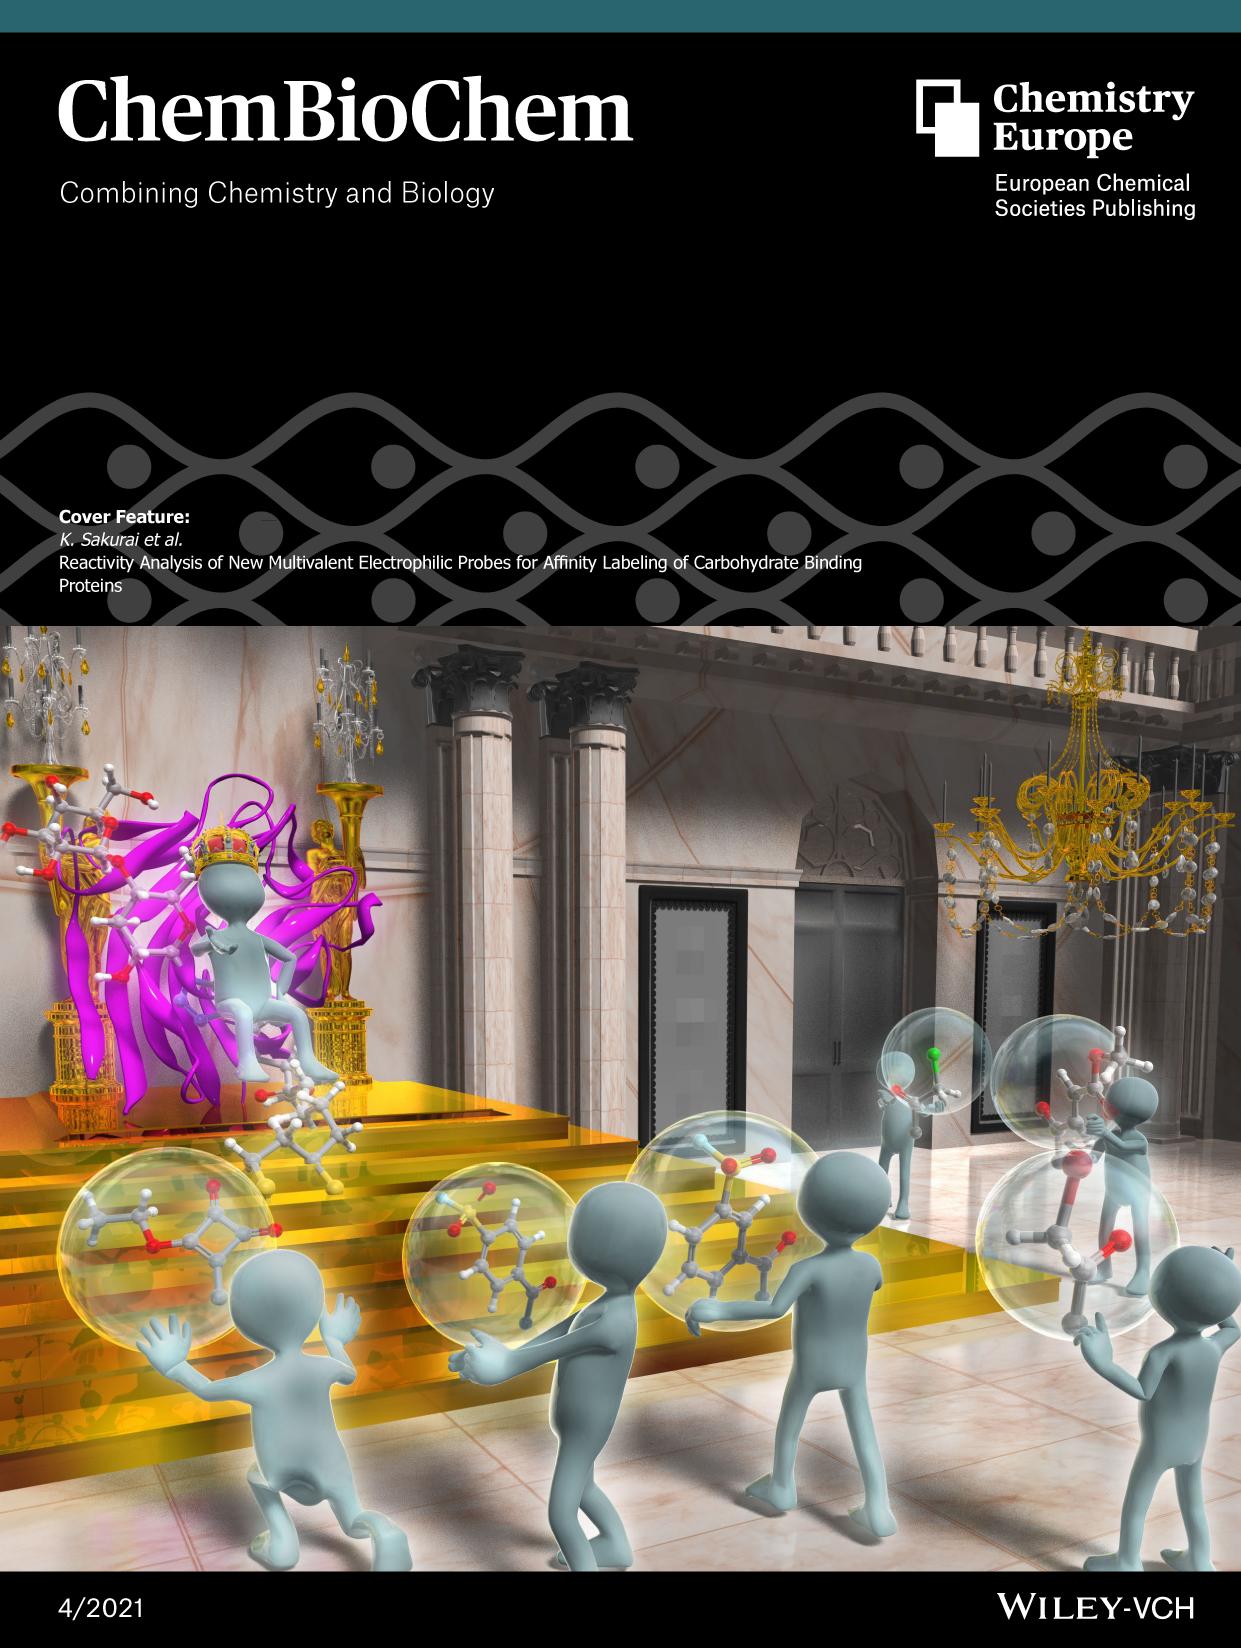 Cover Feature: Reactivity Analysis of New Multivalent Electrophilic Probes for Affinity Labeling of Carbohydrate Binding Proteins (ChemBioChem 42022) by Unknown